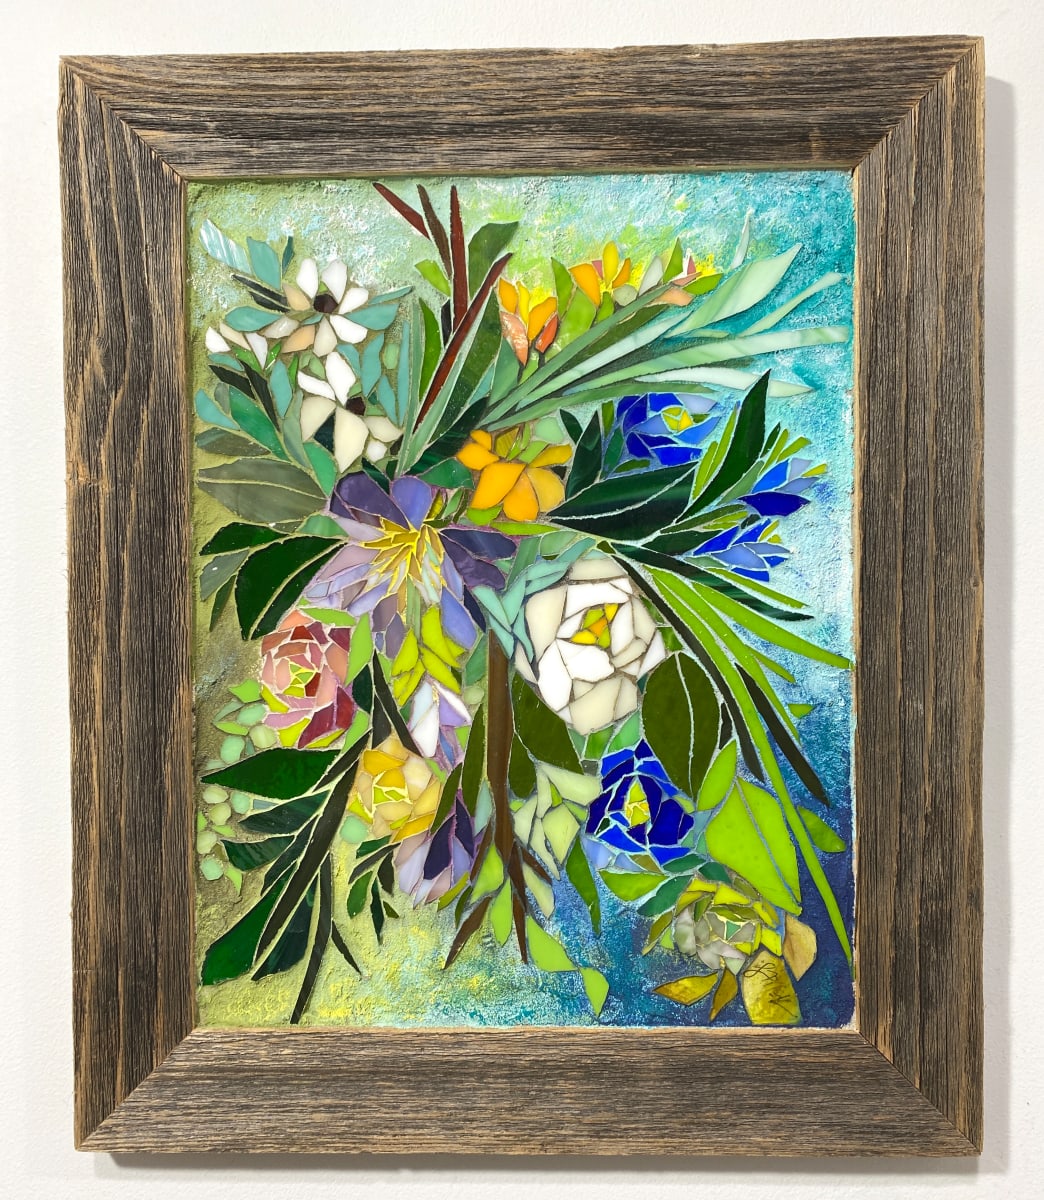 Certainly a Thrill by Laura McKellar  Image: A flowing floral of cottage garden blossoms.
Stained glass and painted grout